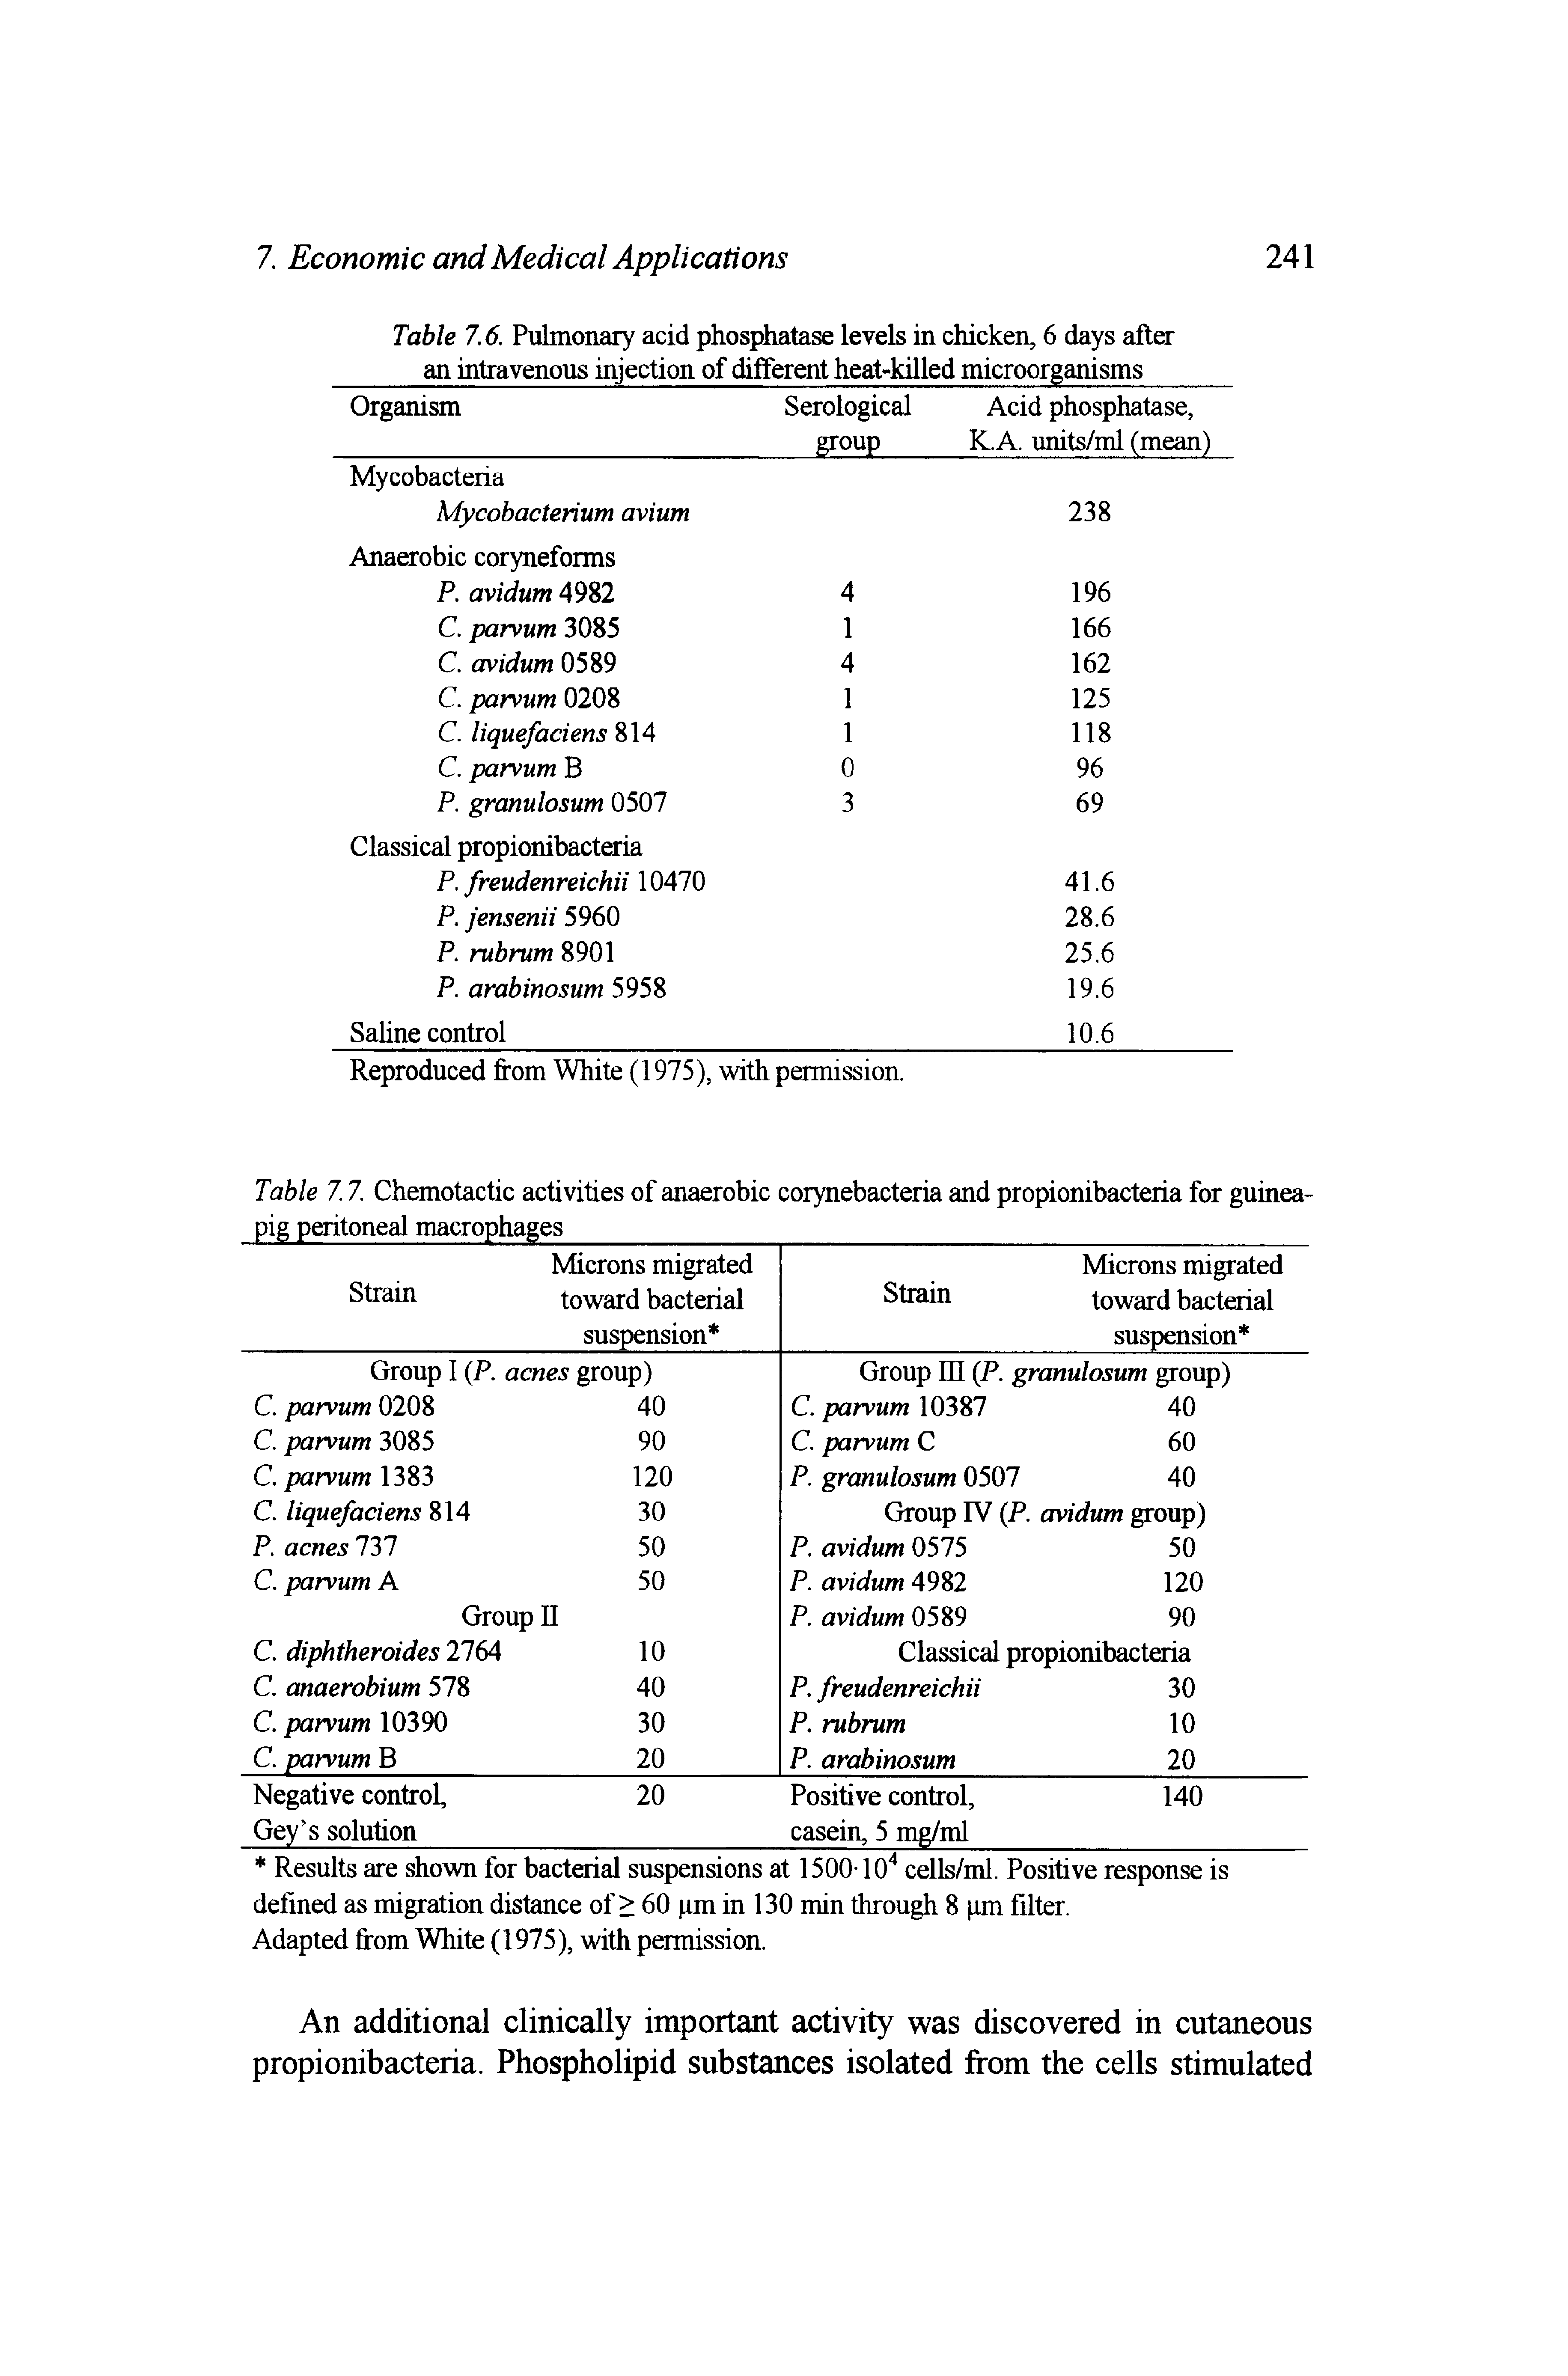 Table 7,6, Pulmonary acid phosphatase levels in chicken, 6 days after an intravenous injection of different heat-killed microorganisms...